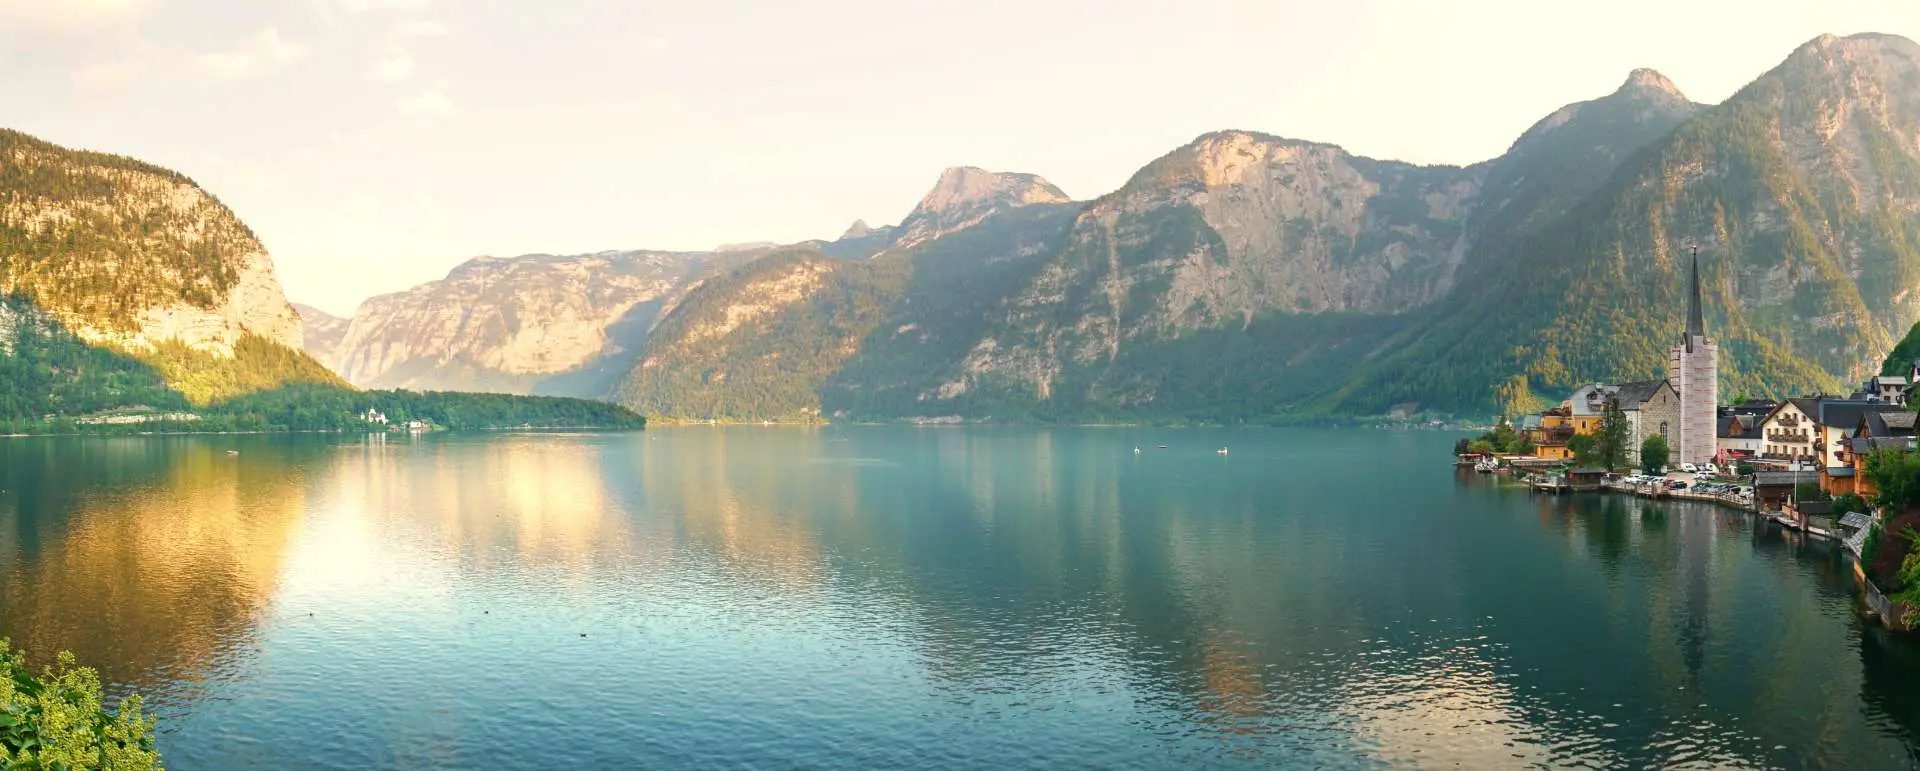 Hallstätter See - the destination for group hotels with parking spaces